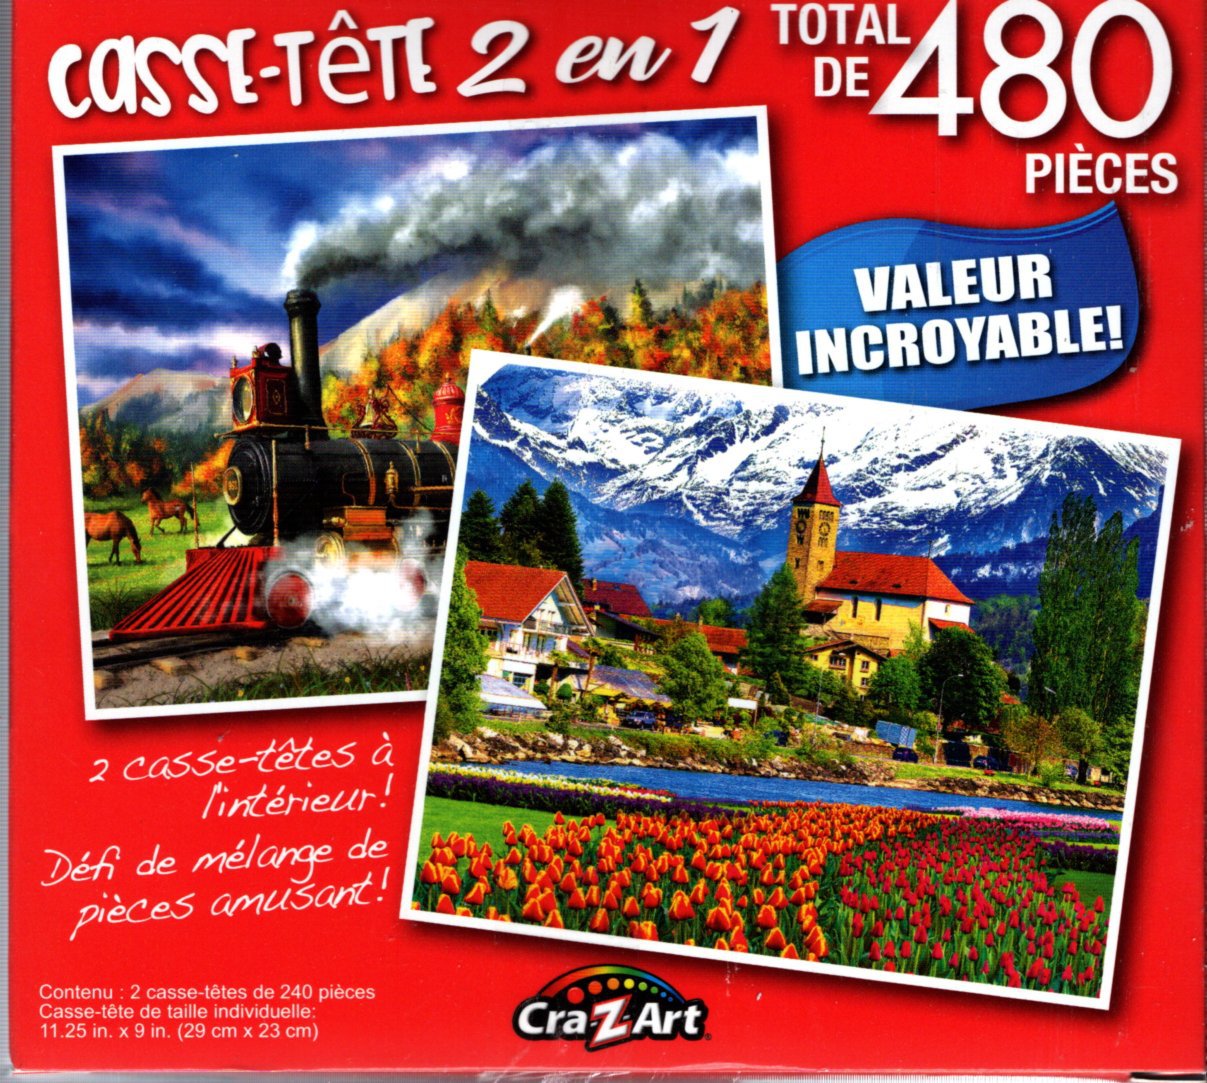 Full Steam Ahead / Brienz Townand Flowers  - Total 480 Piece 2 in 1 Jigsaw Puzzles - p015